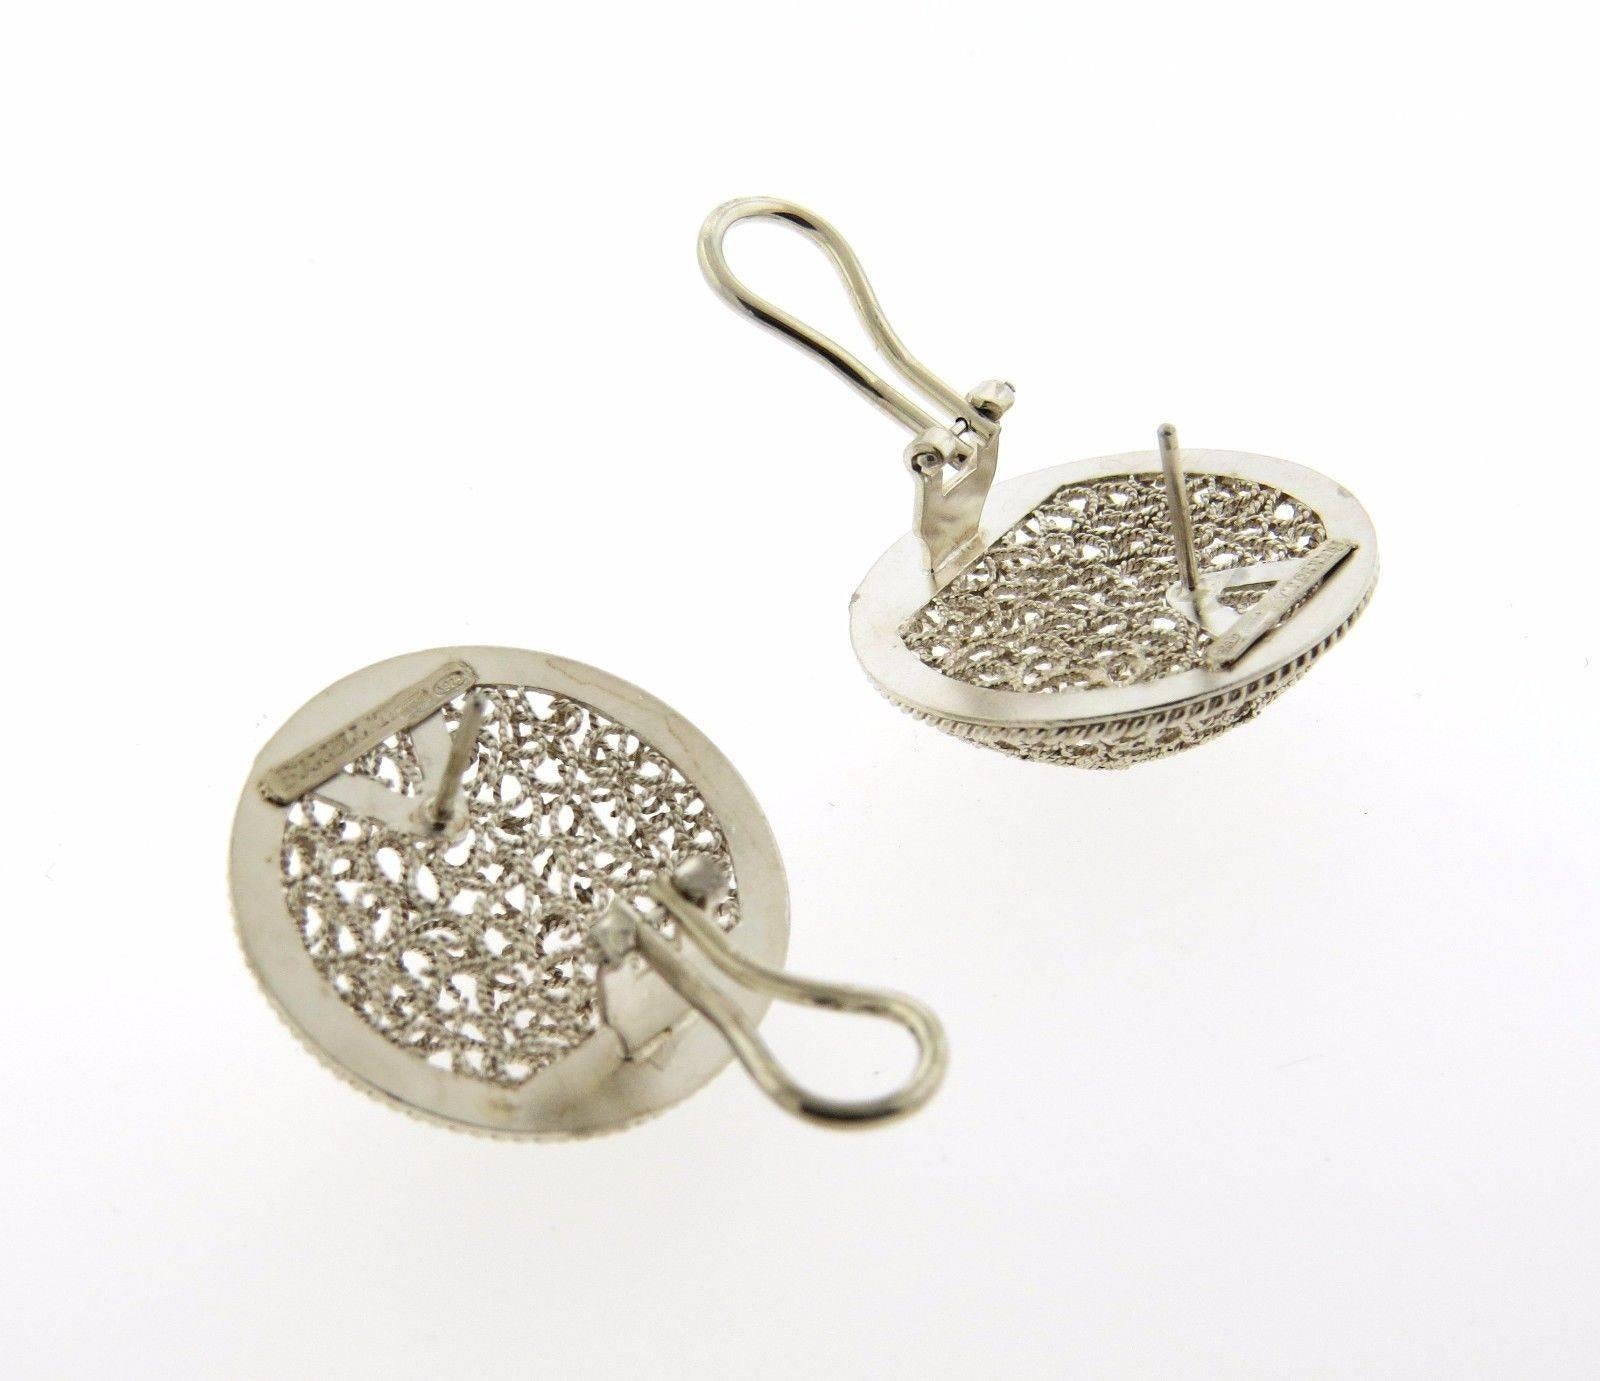 A pair of sterling silver round earrings by Buccellati.  The earrings measure 26mm in diameter and weigh 8.6 grams.  Marked: Buccellati Italy 925.  The earrings come with Buccellati paperwork.
